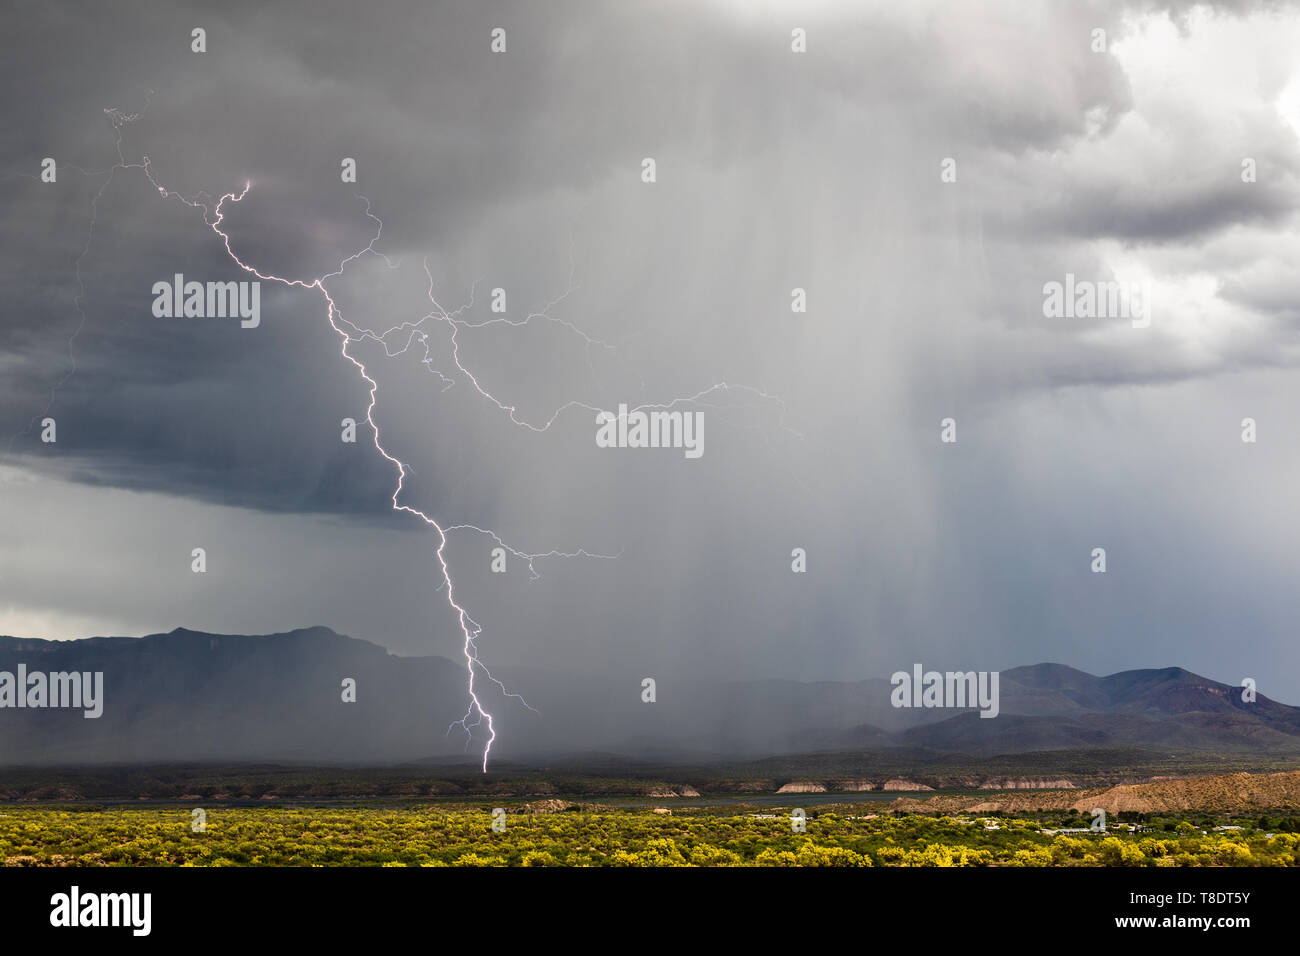 Bright lightning bolt strike with dark clouds and heavy rain from an approaching thunderstorm near Roosevelt Lake, Arizona Stock Photo